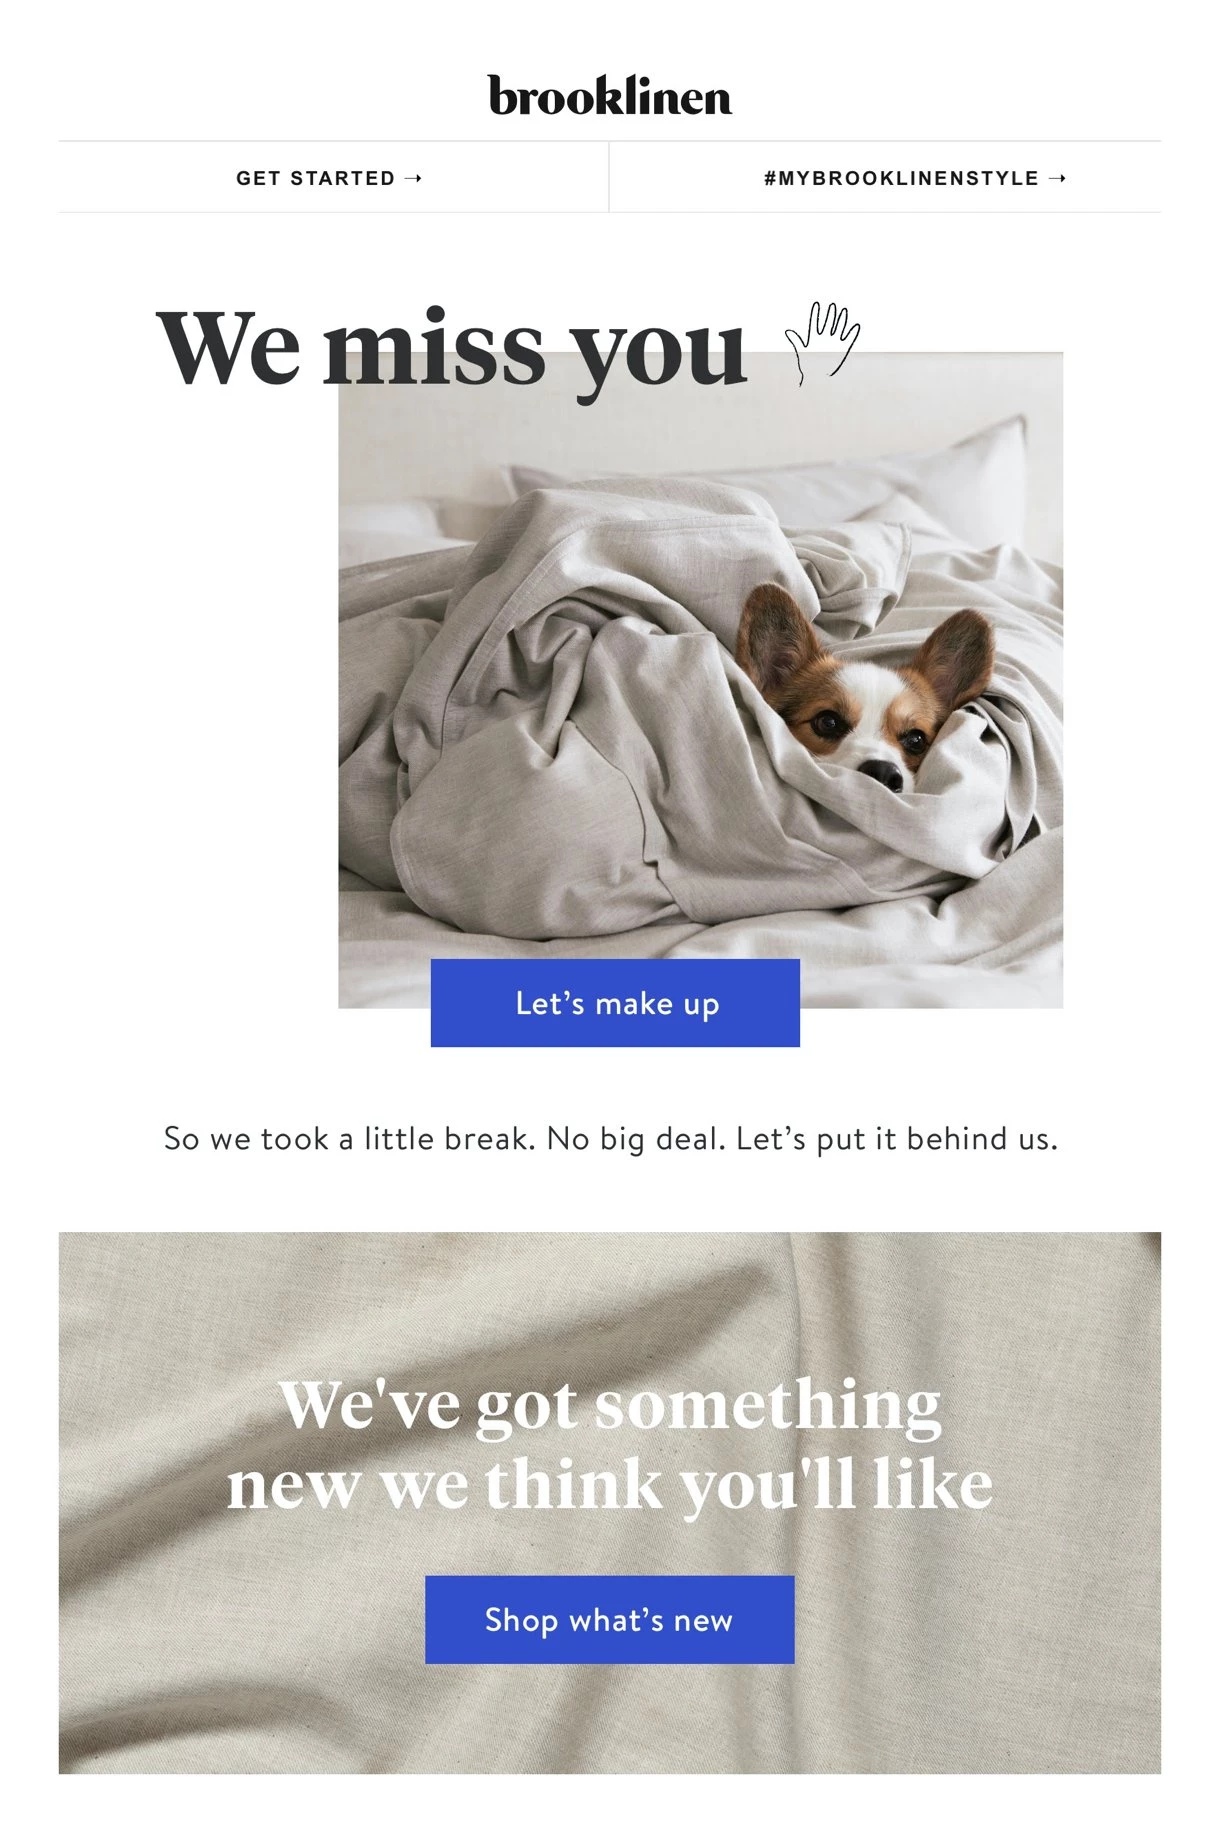 Brooklinen re-engagement email campaign example we miss you with cute dog